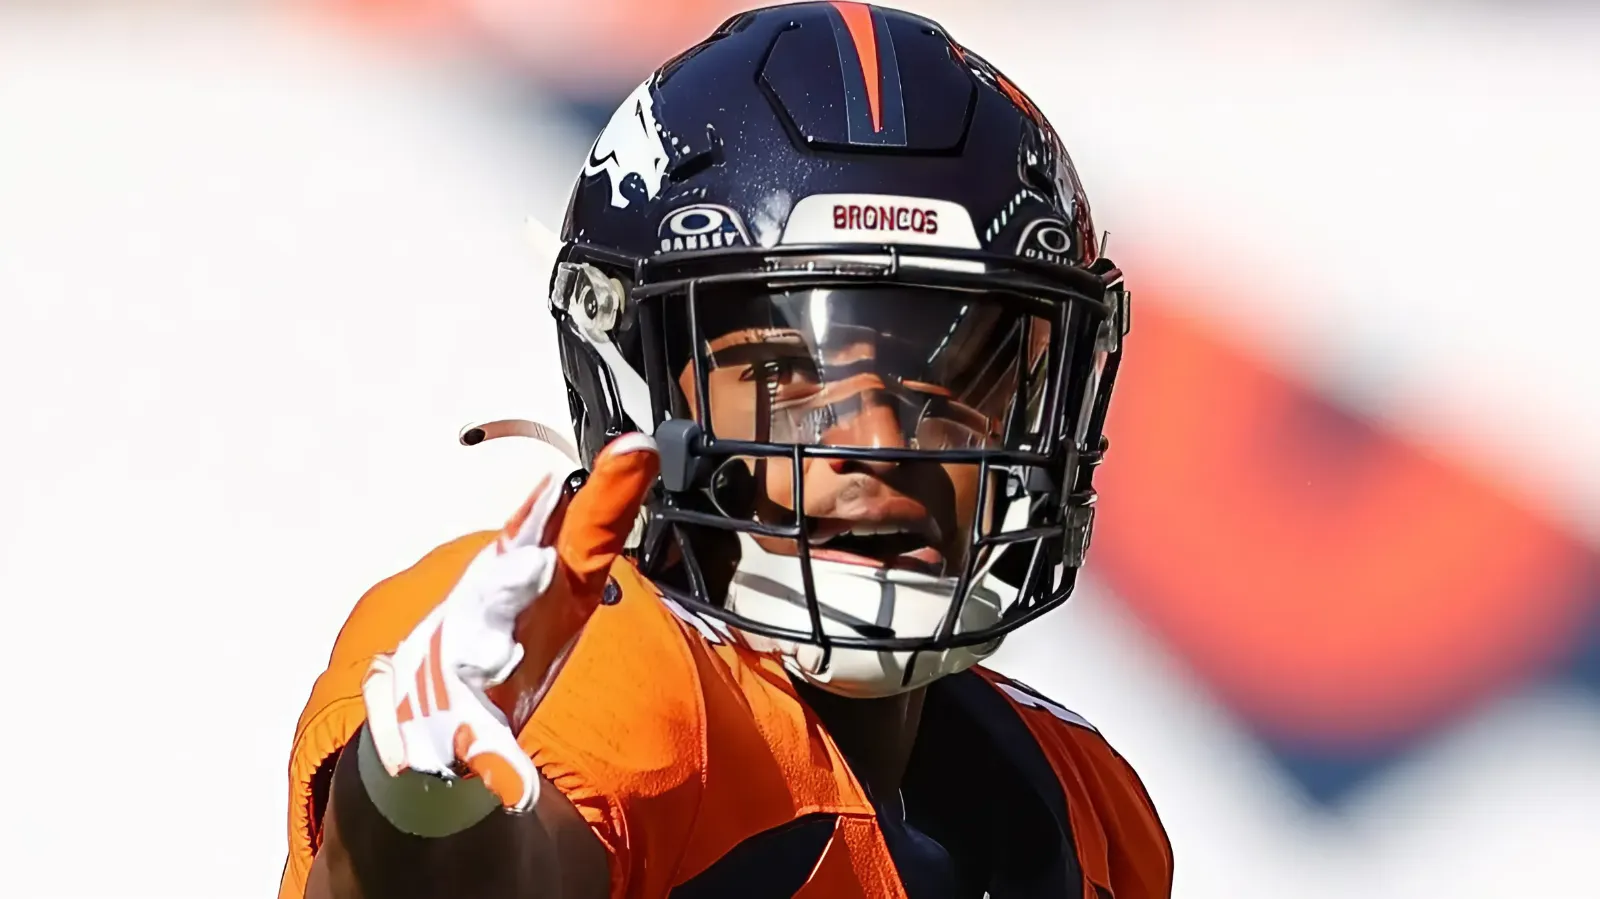 Broncos’ $17 Million Pro Bowler Hints at Potential Training Camp Holdout